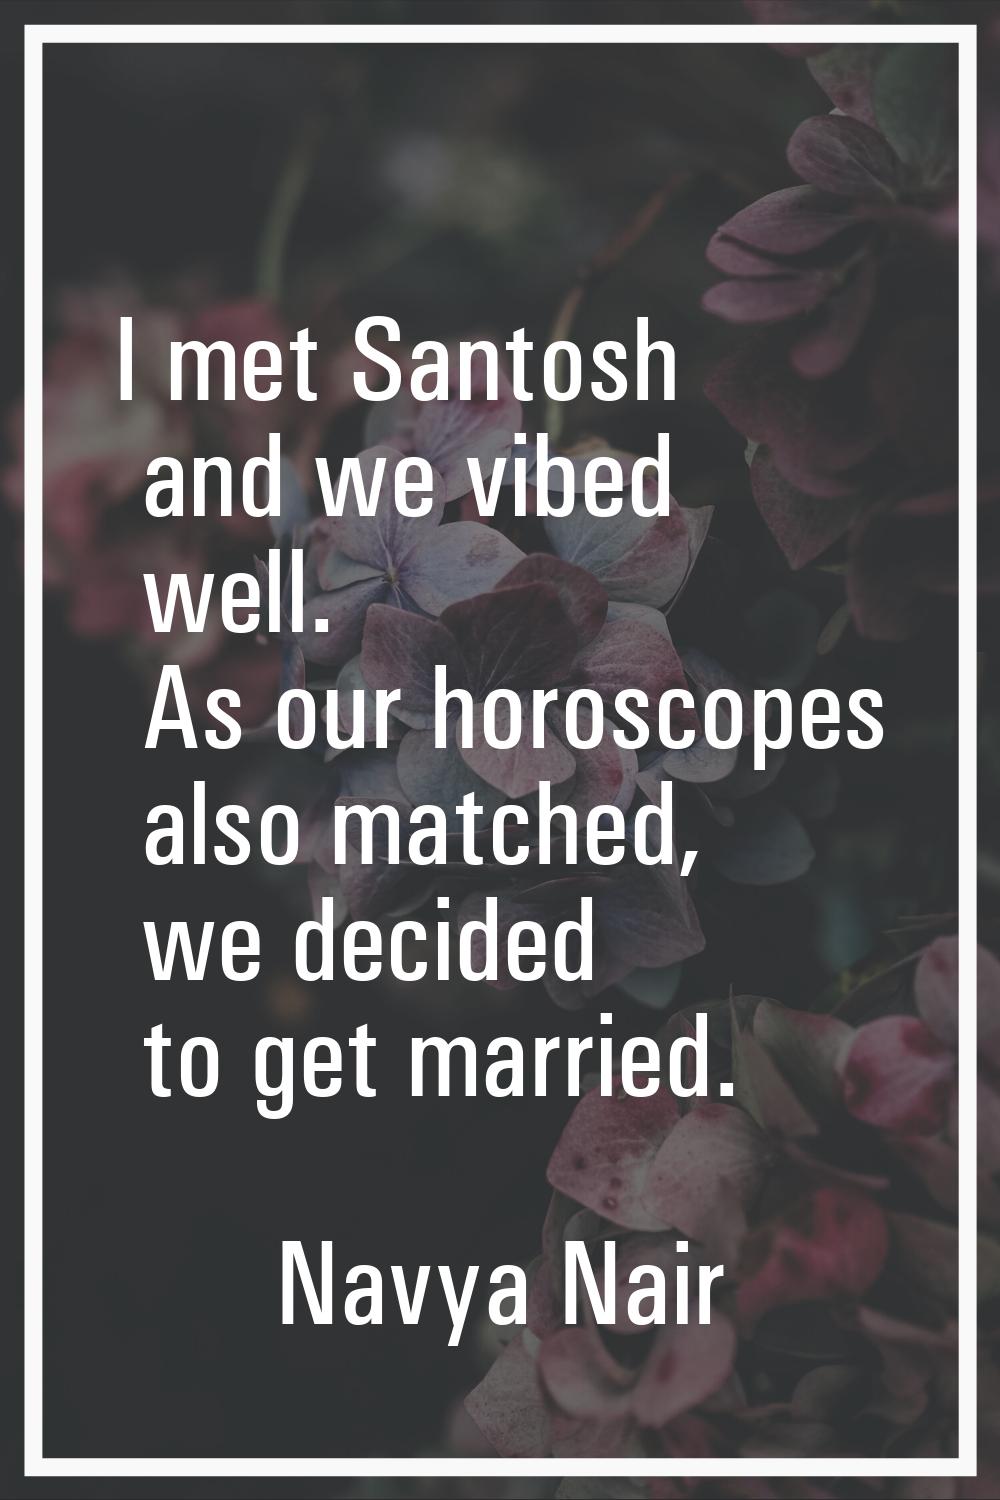 I met Santosh and we vibed well. As our horoscopes also matched, we decided to get married.